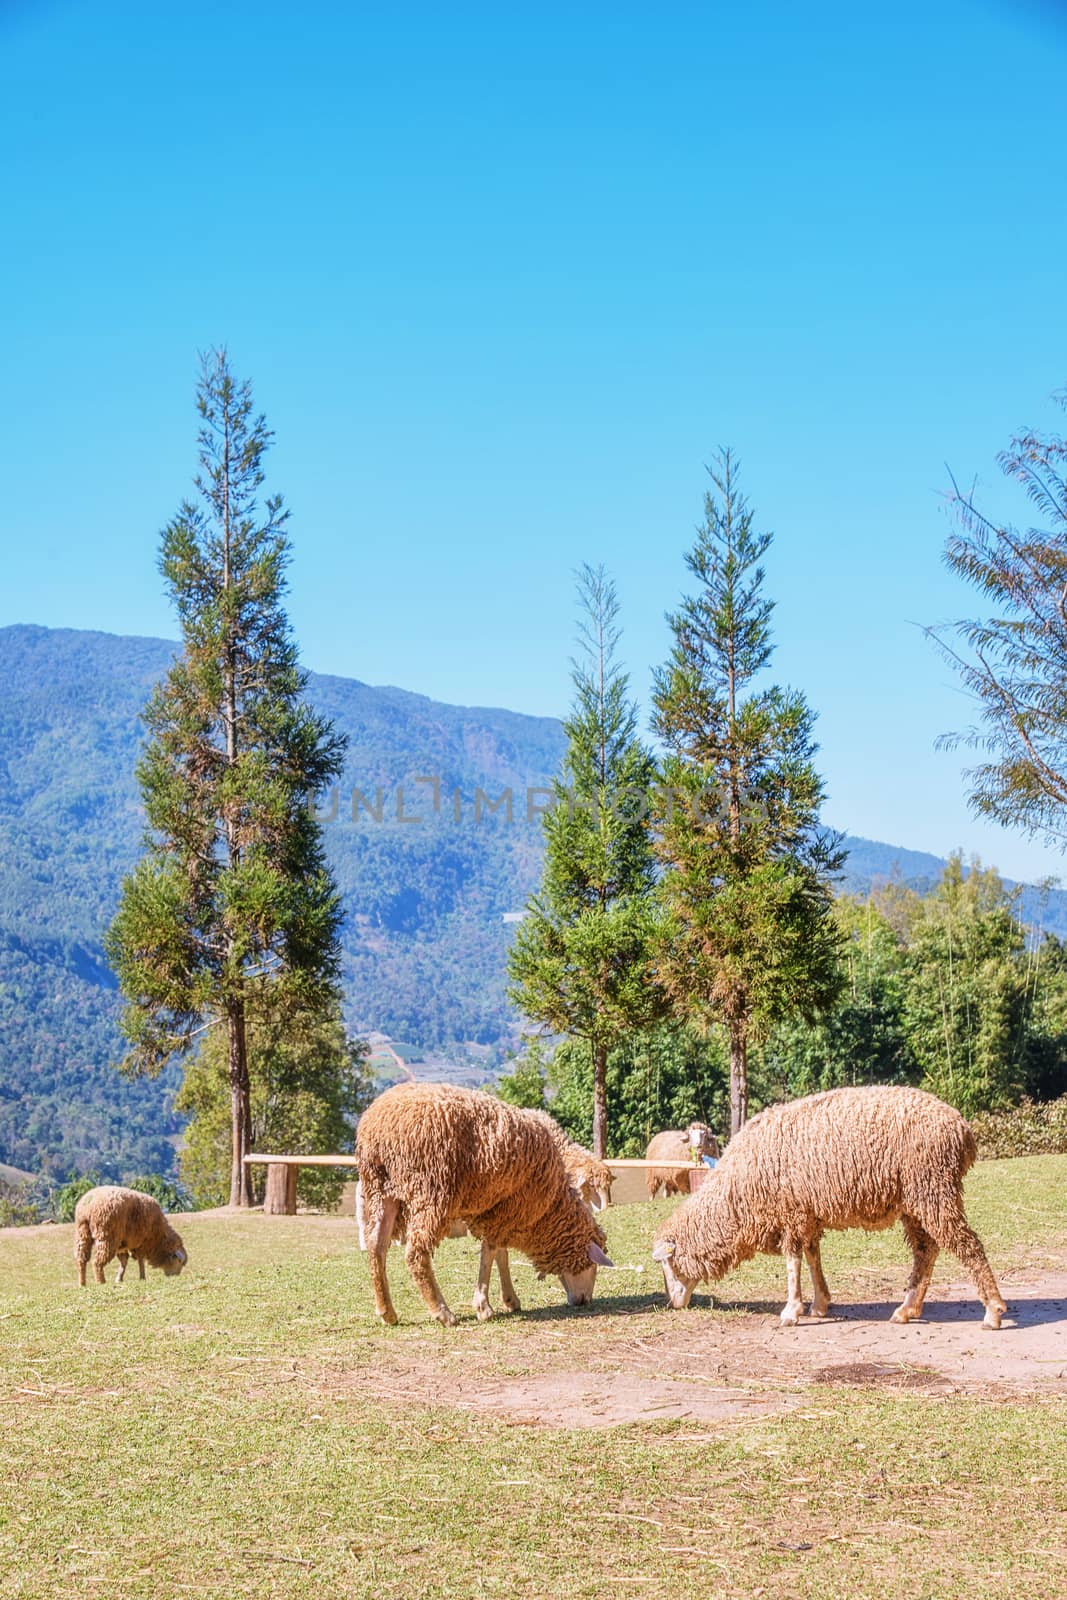 Sheep chewing grass on a meadow at Doi Inthanon Chiang mai, thailand